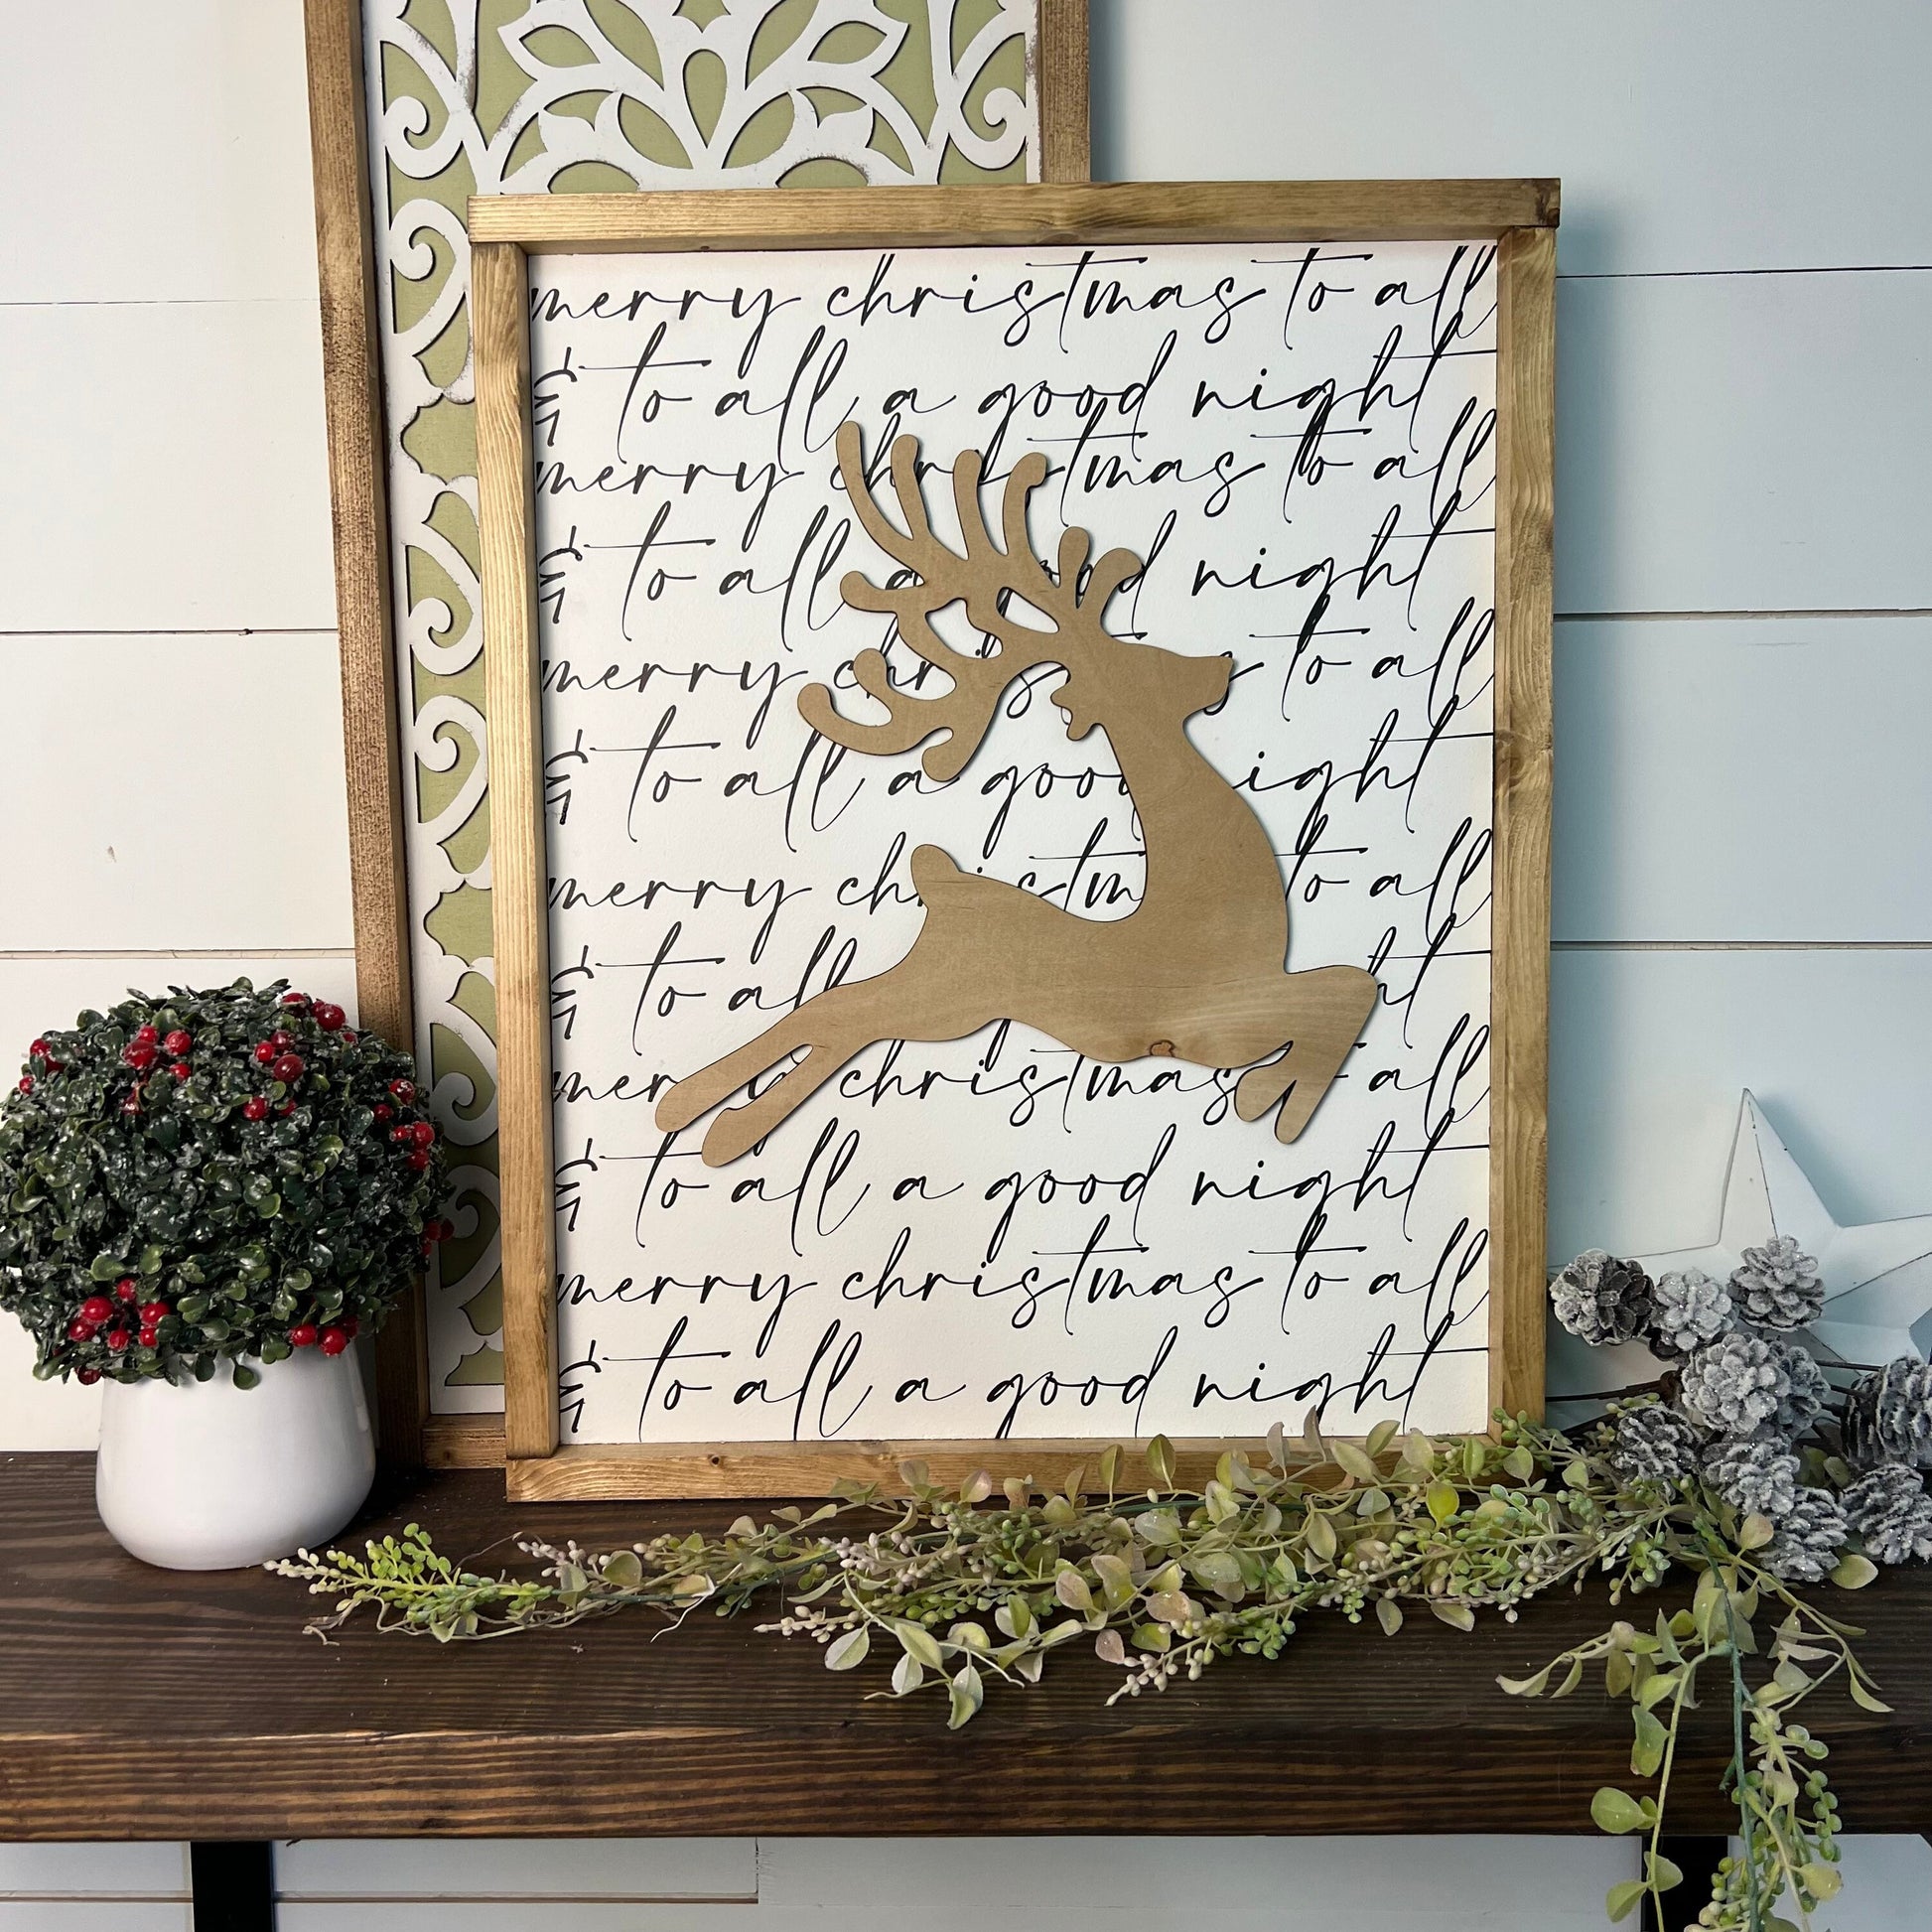 merry Christmas to all and to all a good night, reindeer - Christmas wood sign, mantle decor [FREE SHIPPING!]